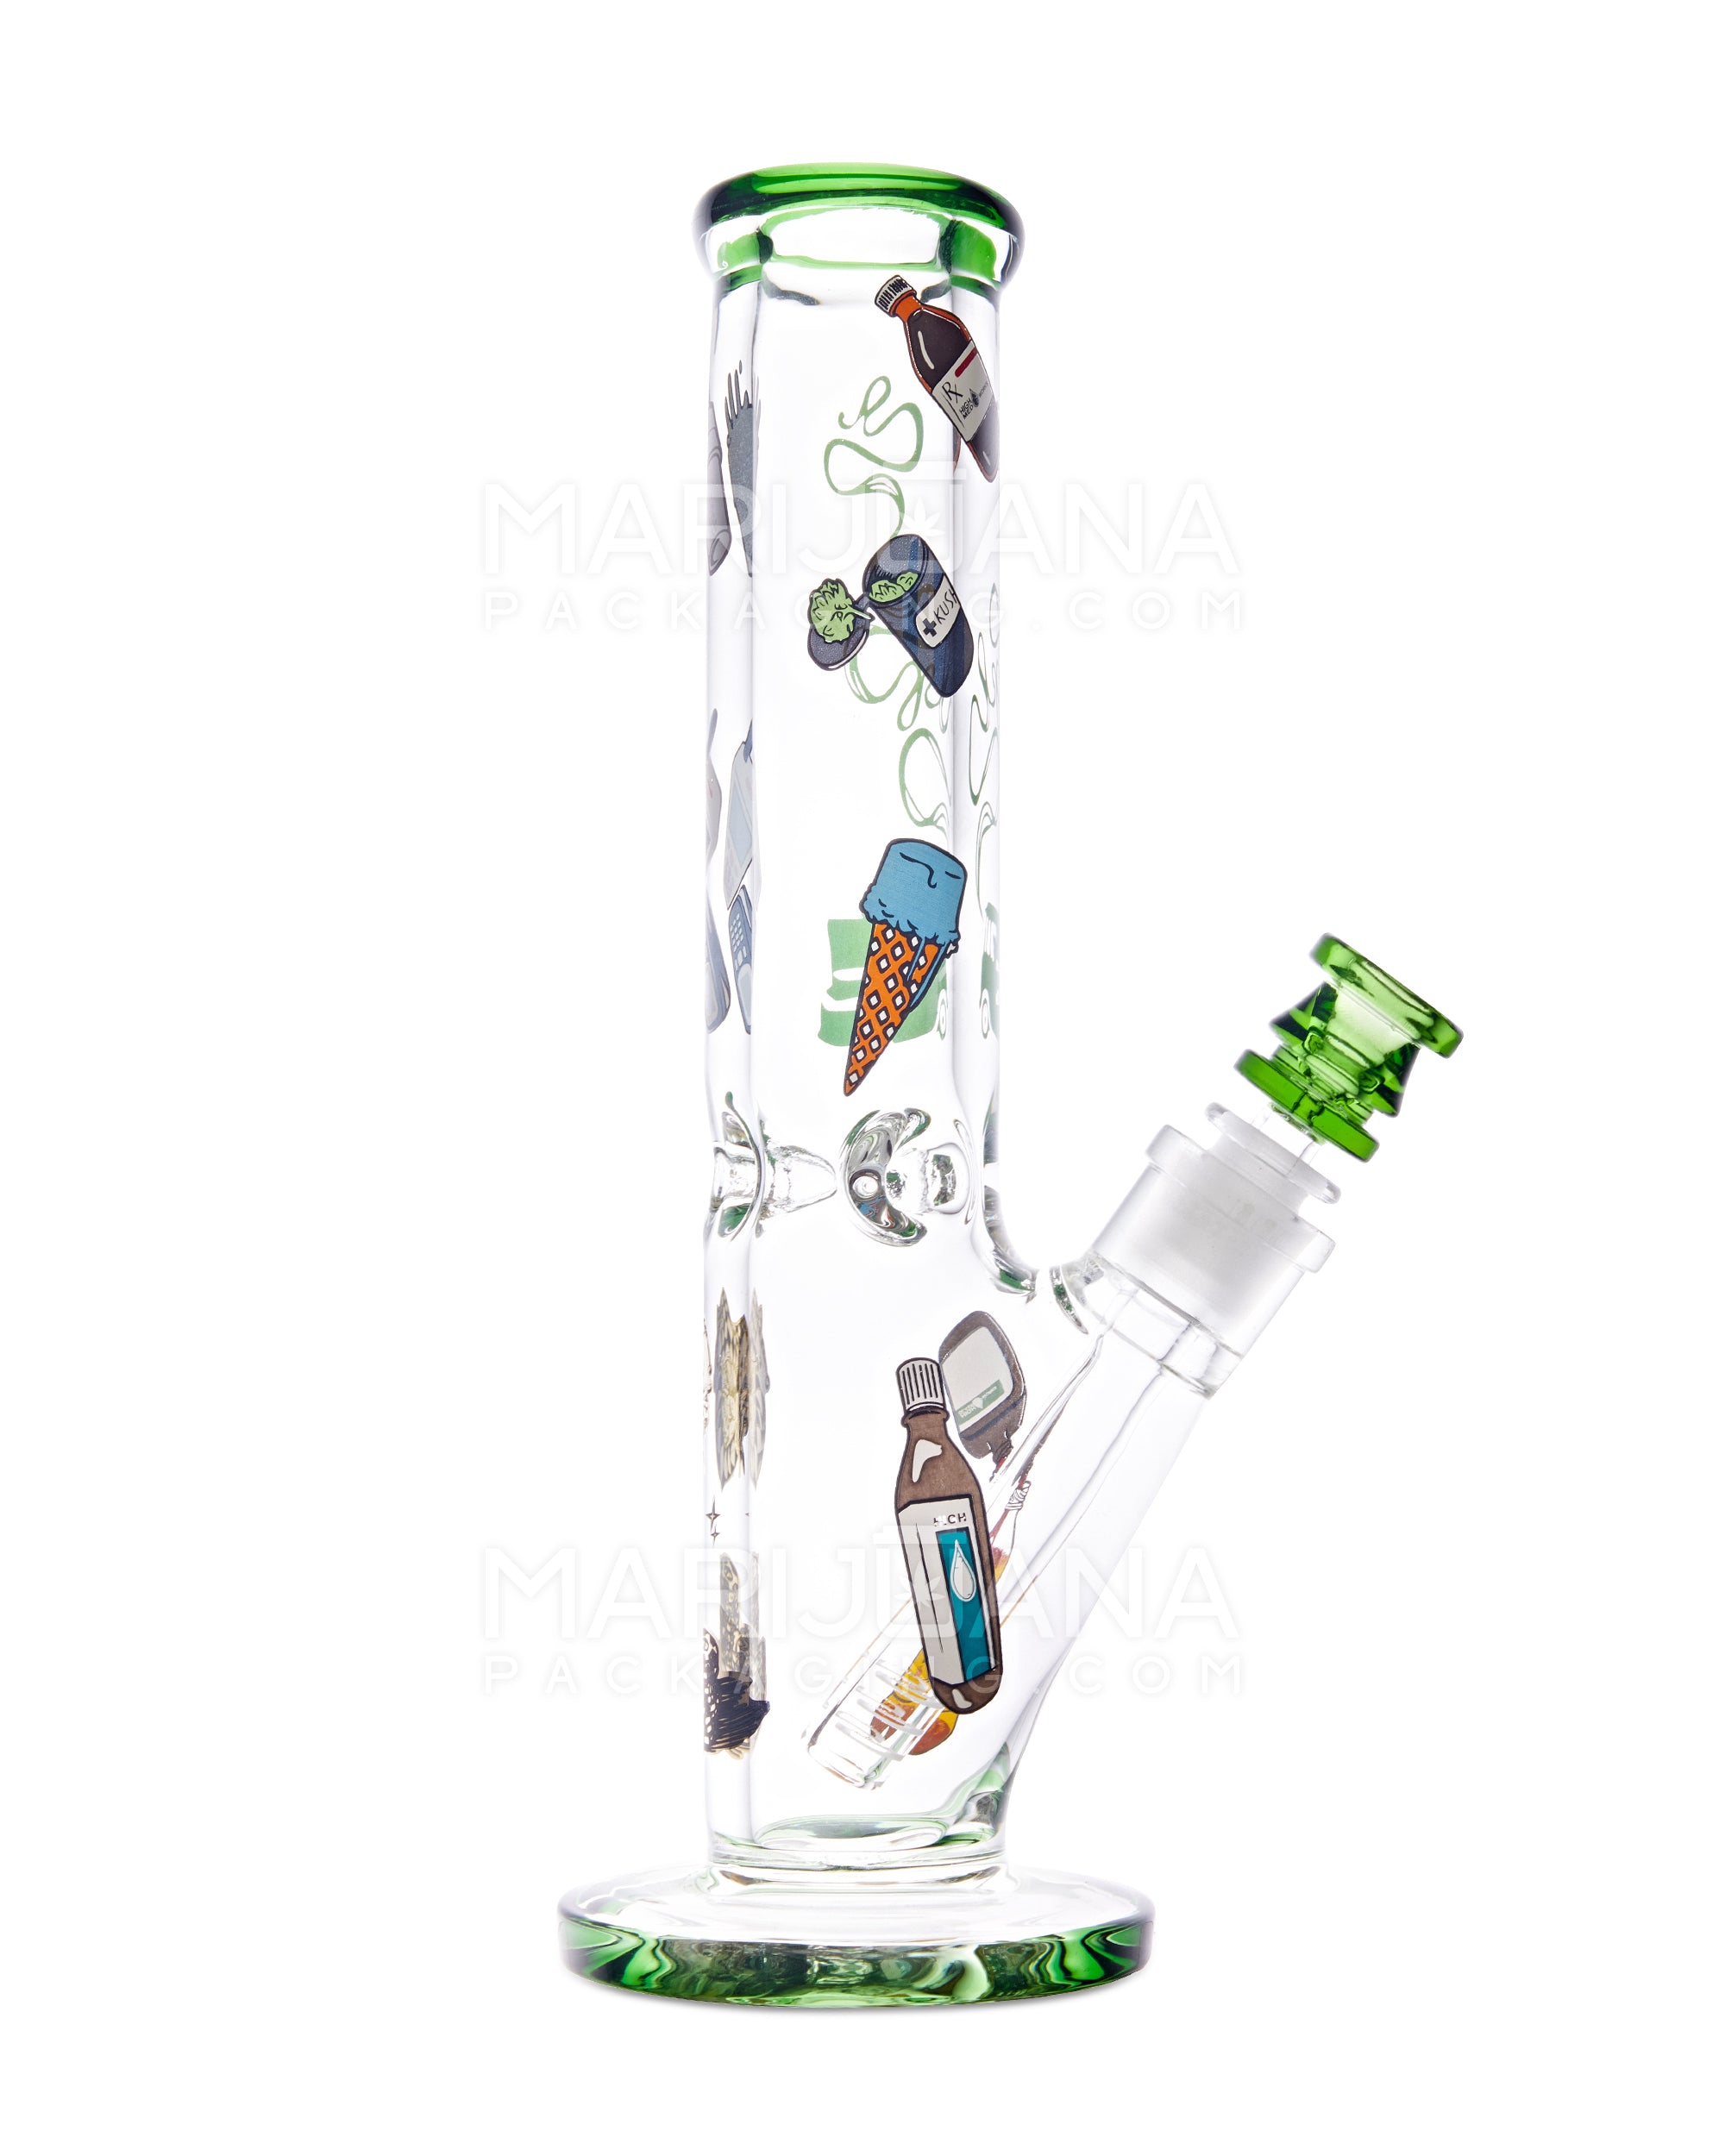 USA Glass | Straight Heavy Glass Water Pipe w/ Decals | 12in Tall - 18mm Bowl - Green